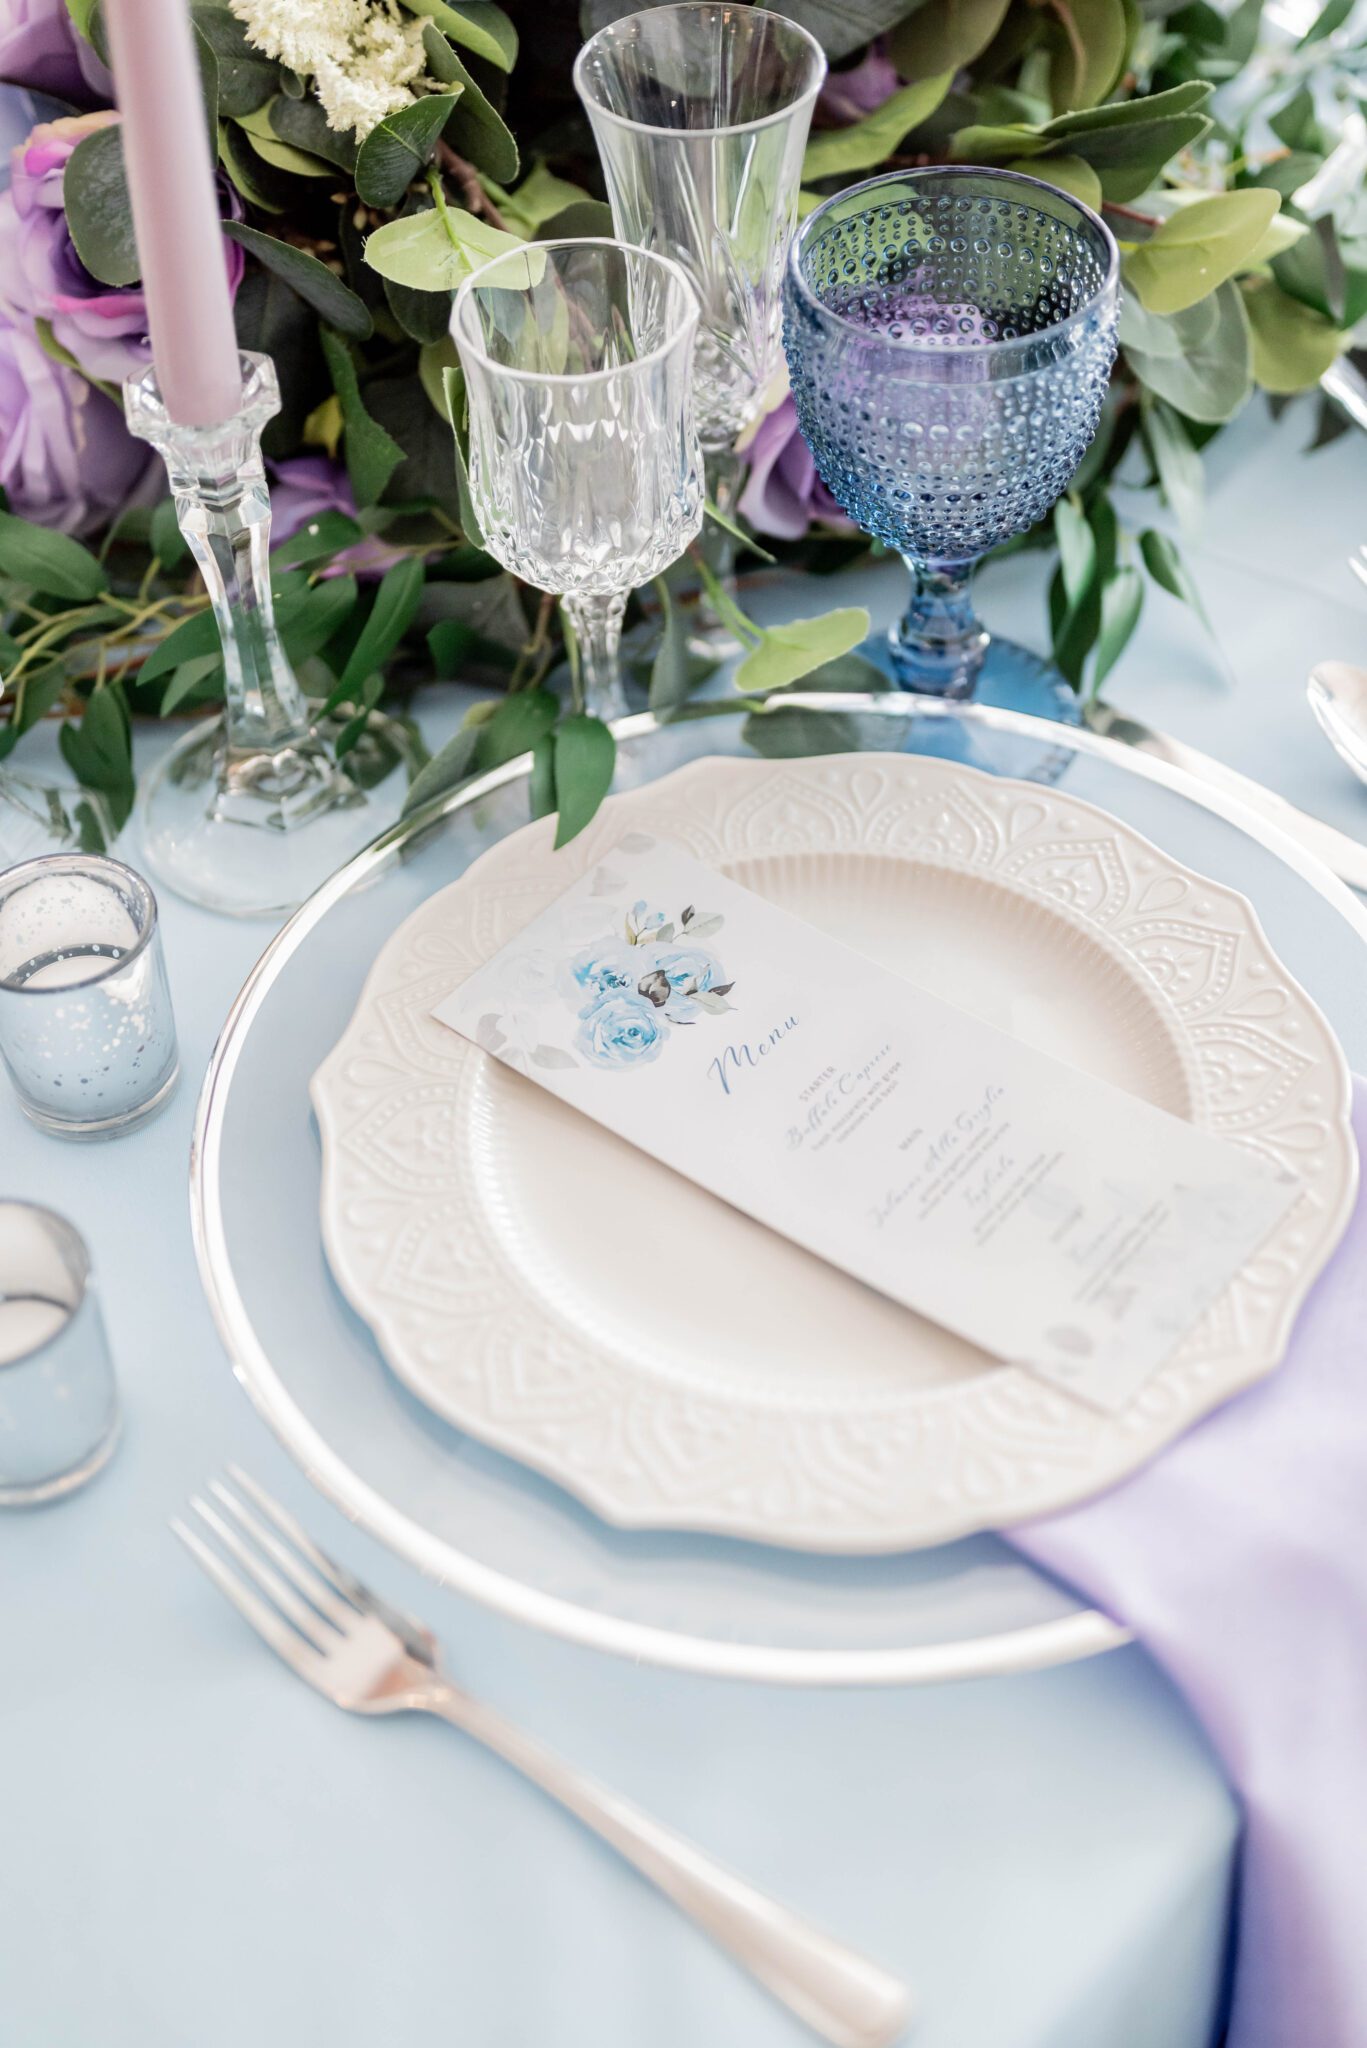 Custom menu stationery with blue florals, grey-toned vines and calligraphy, baby blue linen, pastel purple napkins, blue crystal goblets and silver mercury votives decorate reception table, lush green, purple and baby blue centrepiece ideas